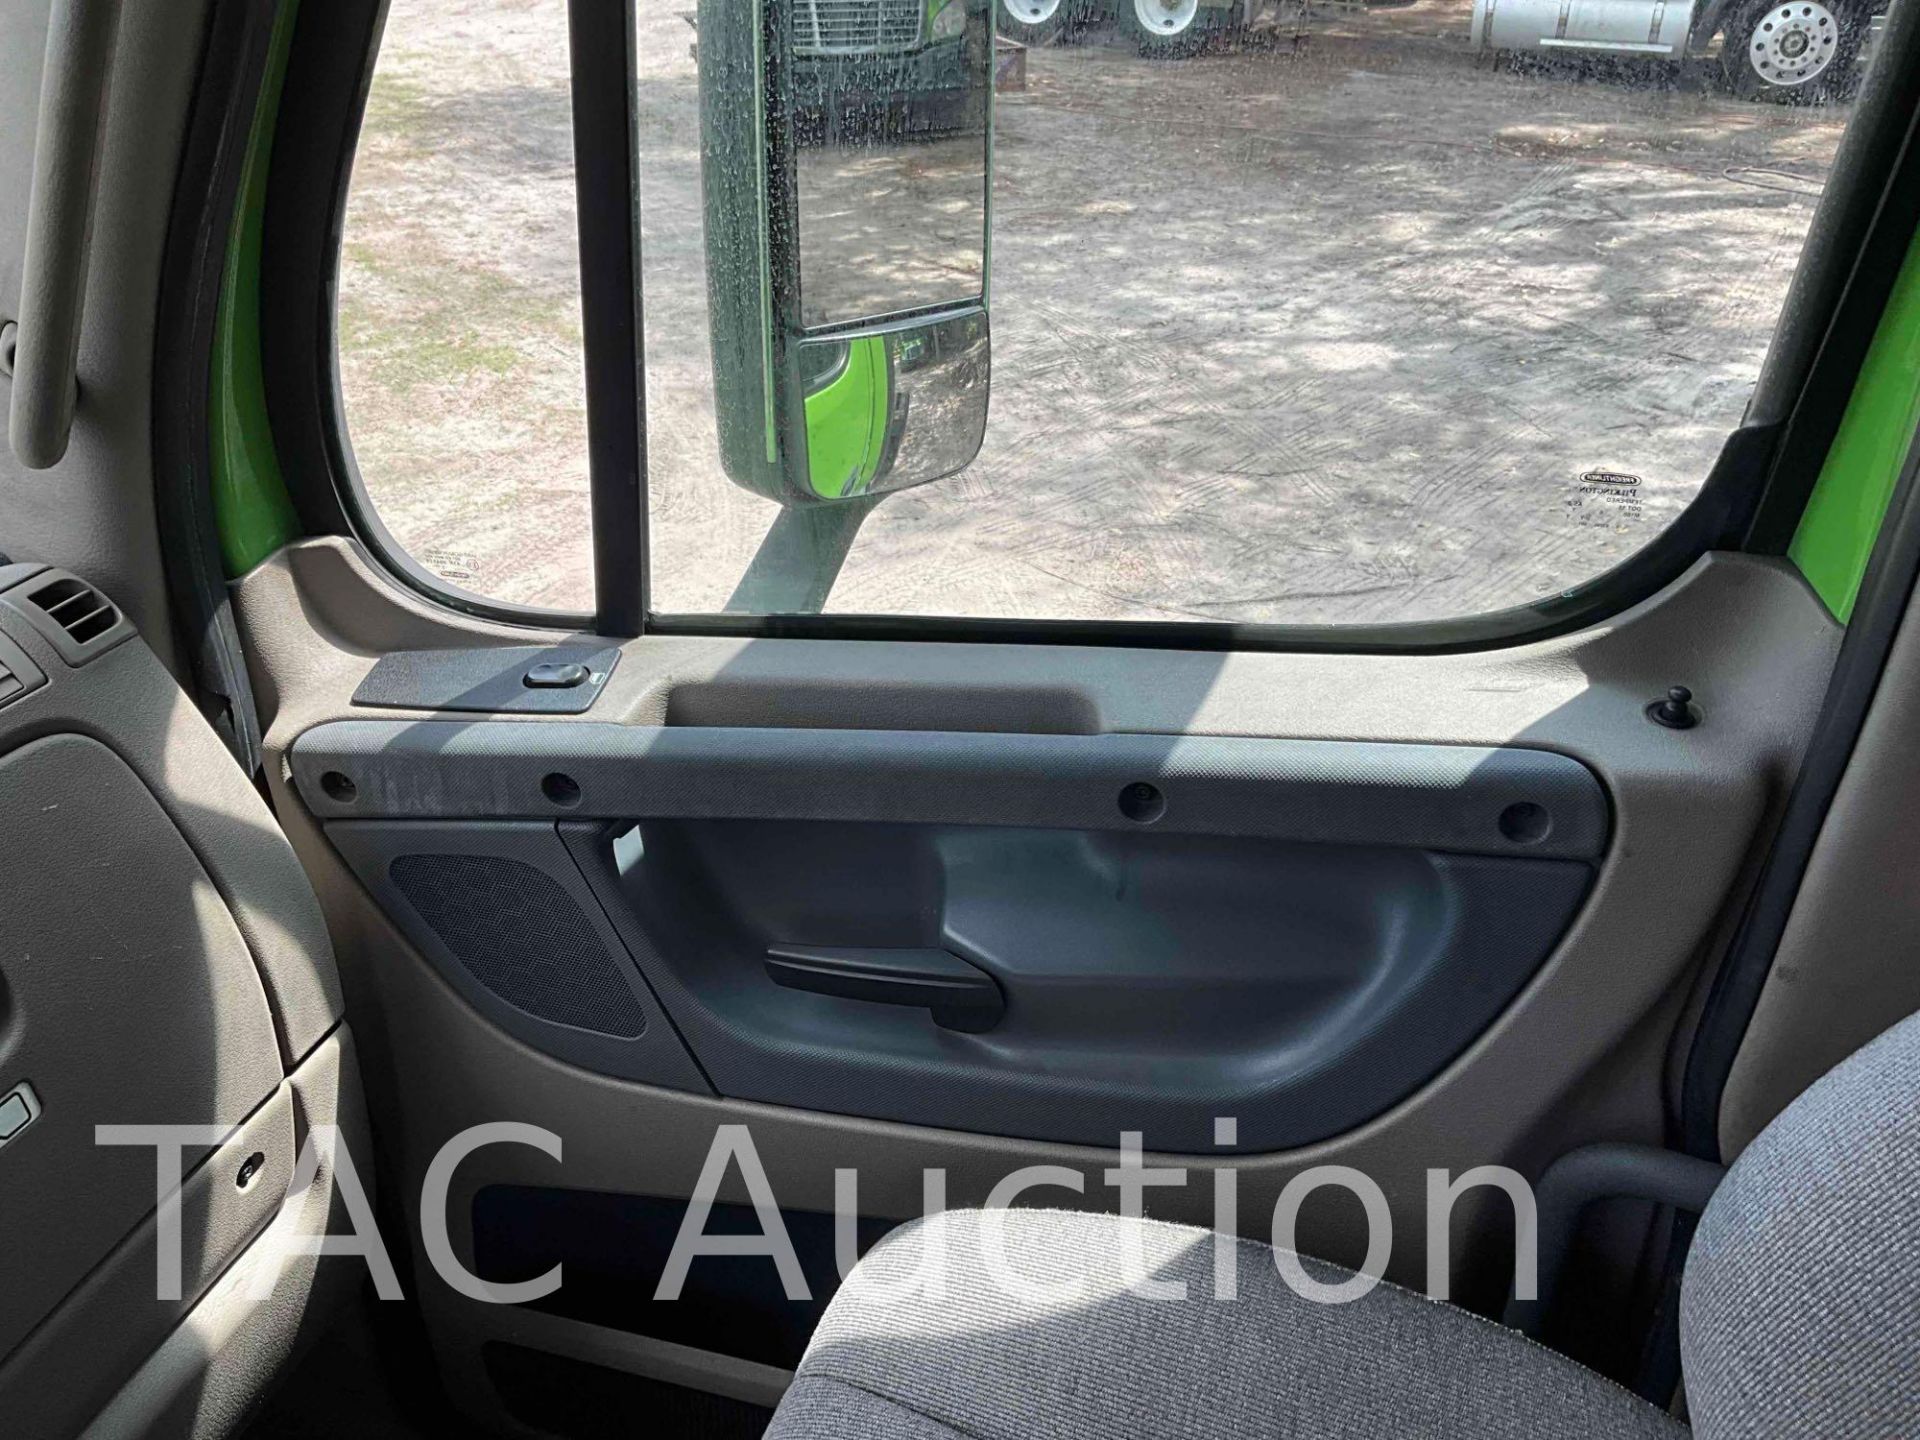 2016 Freightliner Cascadia Day Cab - Image 30 of 78